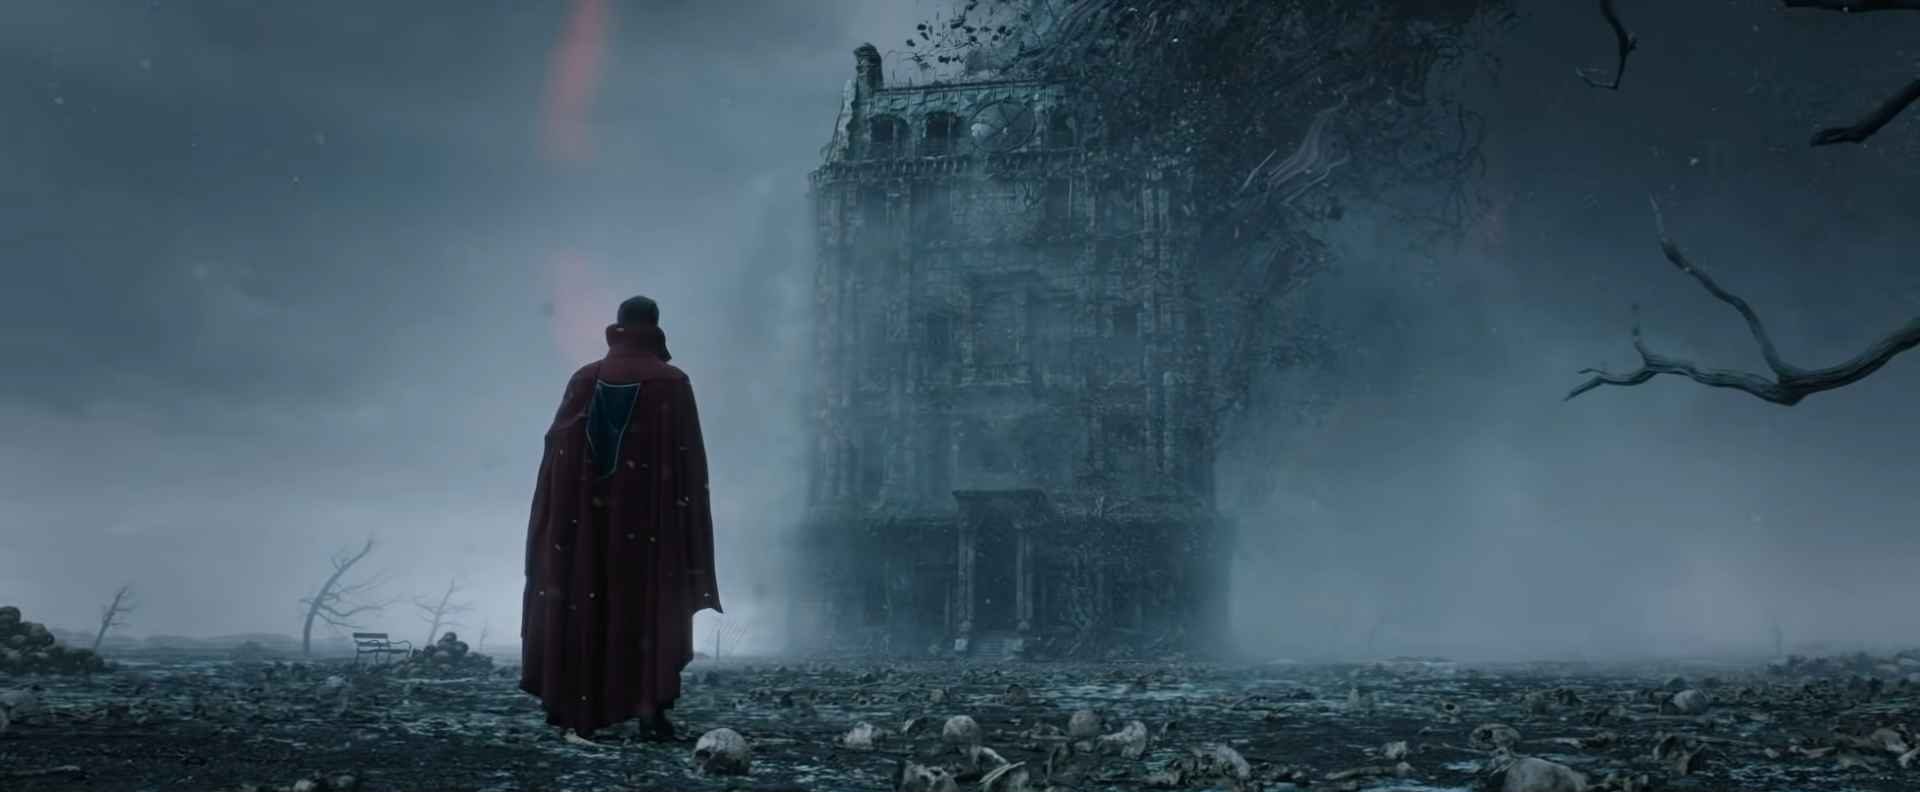 The Significance Of Dreams In Doctor Strange 2